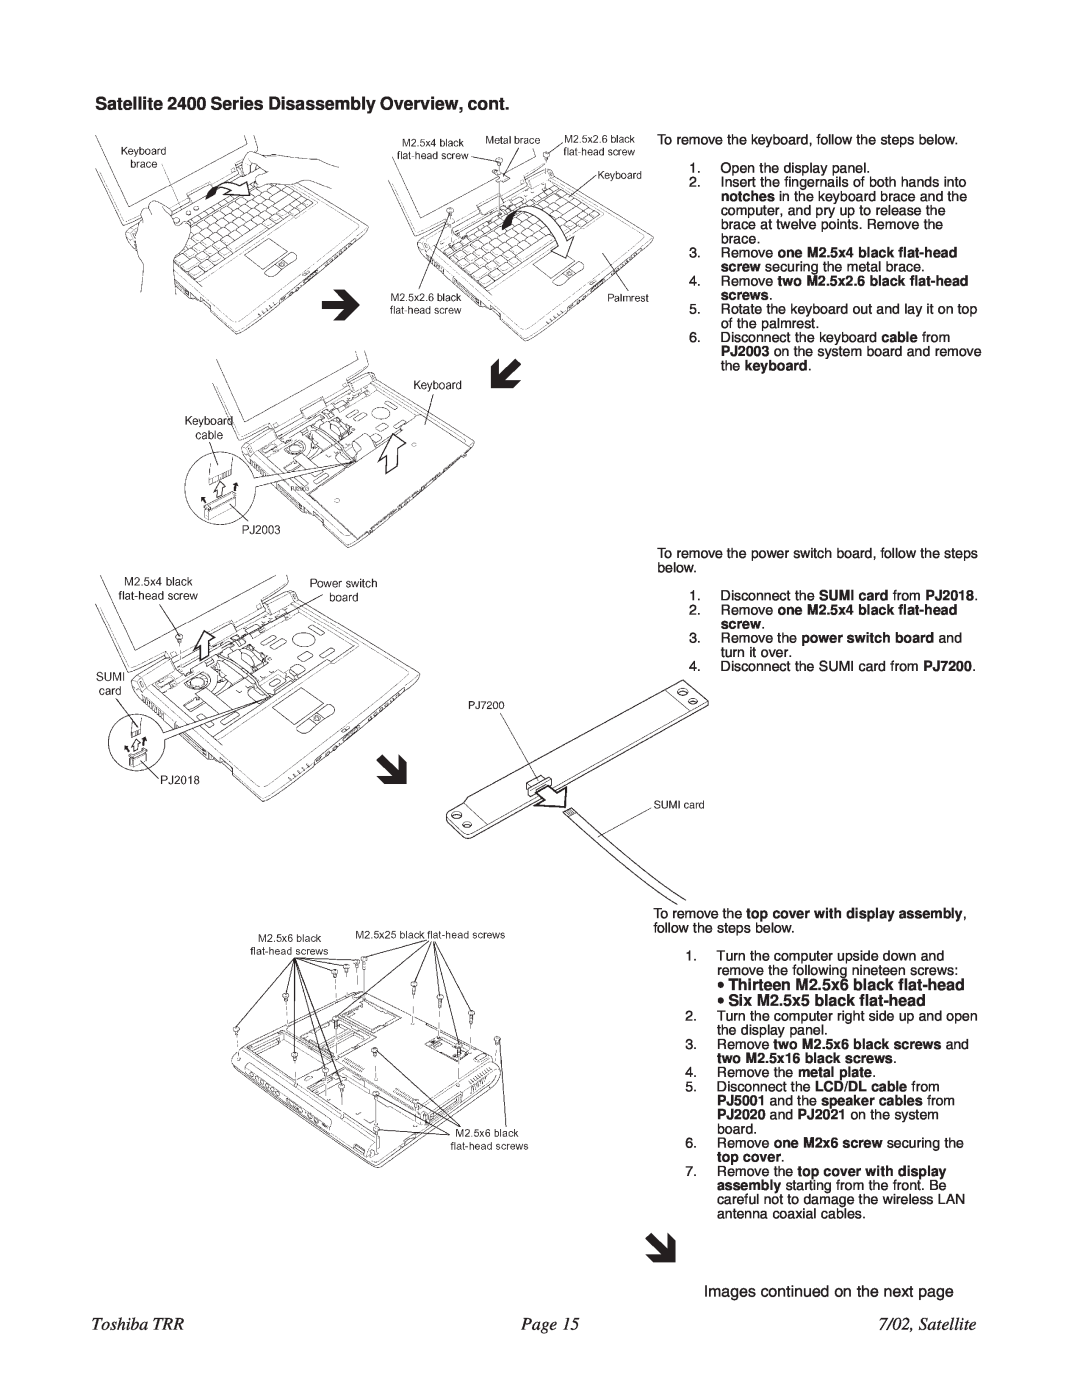 Toshiba 2405-S201 specifications Satellite 2400 Series Disassembly Overview, cont, Toshiba TRR, Page, 7/02, Satellite 